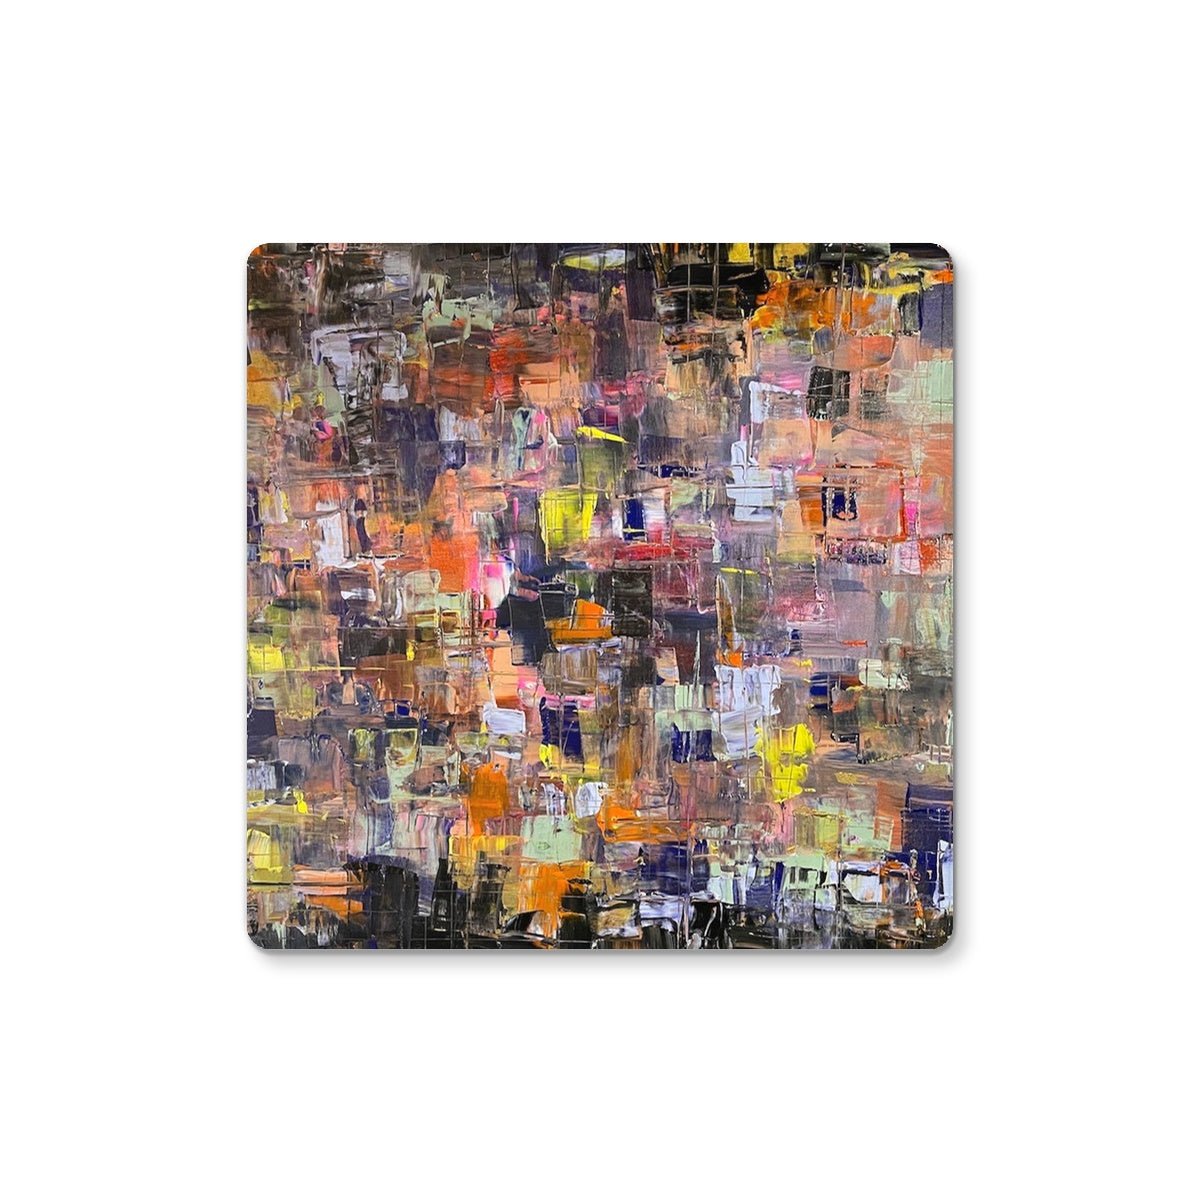 Never Enough Art Gifts Coaster-Coasters-Abstract & Impressionistic Art Gallery-6 Coasters-Paintings, Prints, Homeware, Art Gifts From Scotland By Scottish Artist Kevin Hunter